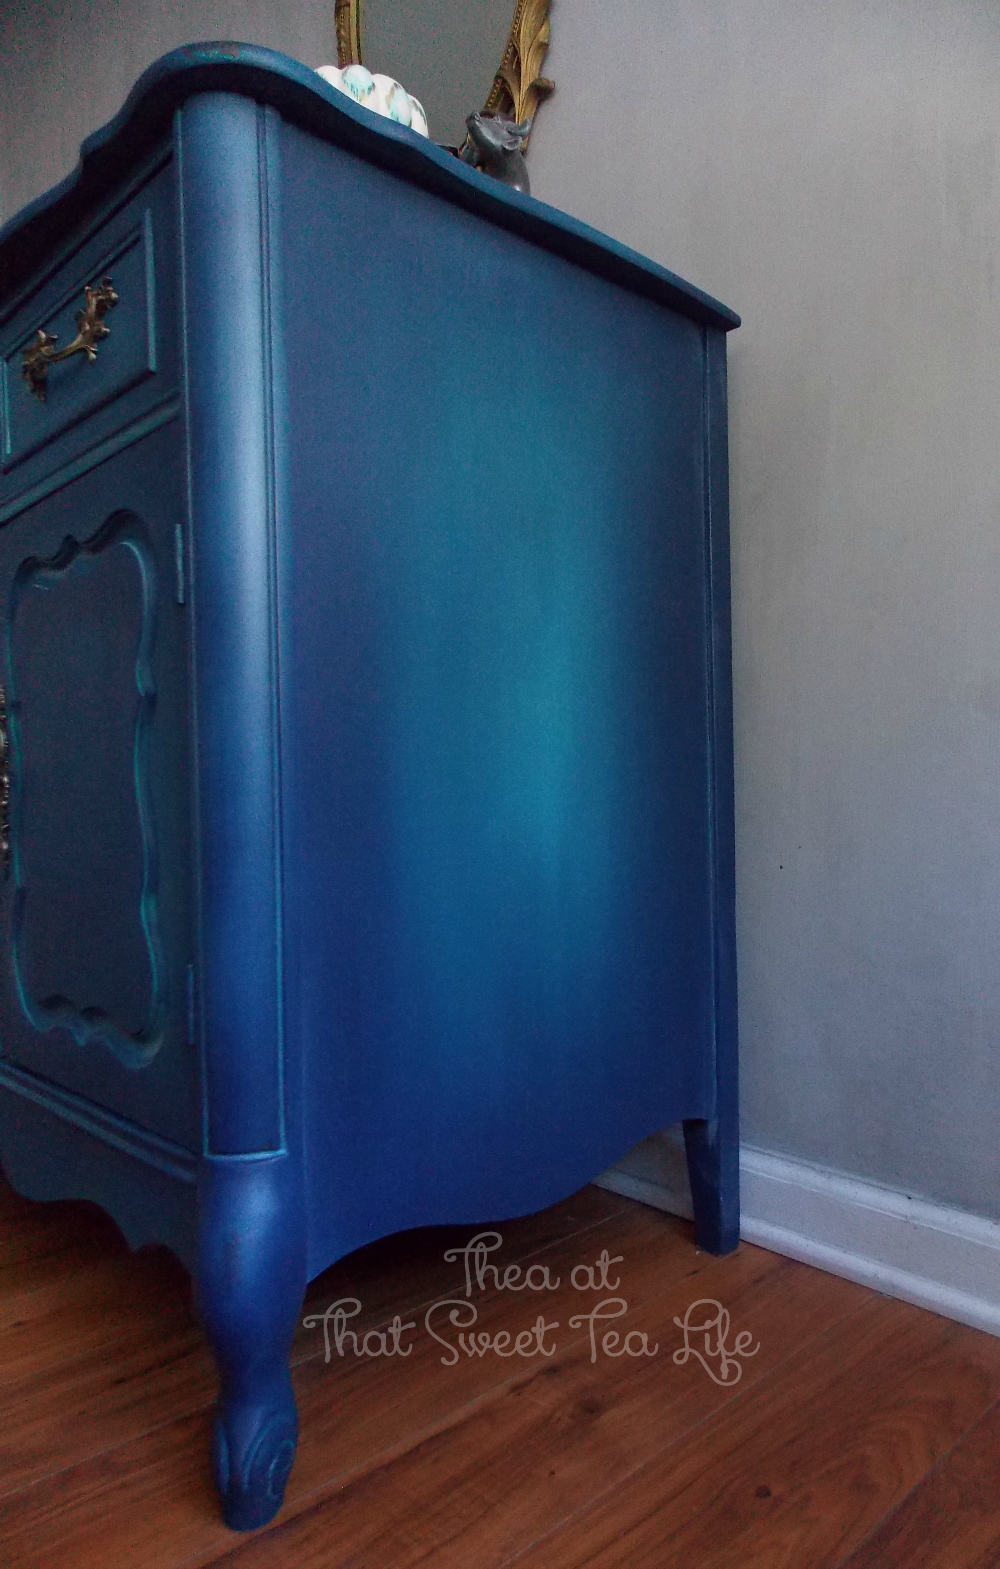 Blue Painted Furniture: Your Blended Paint Inspiration by That Sweet Tea Life | right angle | Shaded Furniture| How to create a blended Paint Furniture Finish | Blended Painted Furniture Ideas | Furniture Painting Tips | How to paint Furniture | Blending Blue Furniture Makeover | Layered Paint | Blended Painting | Dresser Makeover | Furniture DIY | #paintblending | #blendedpaintfinish | #blendedfurniturepaint 